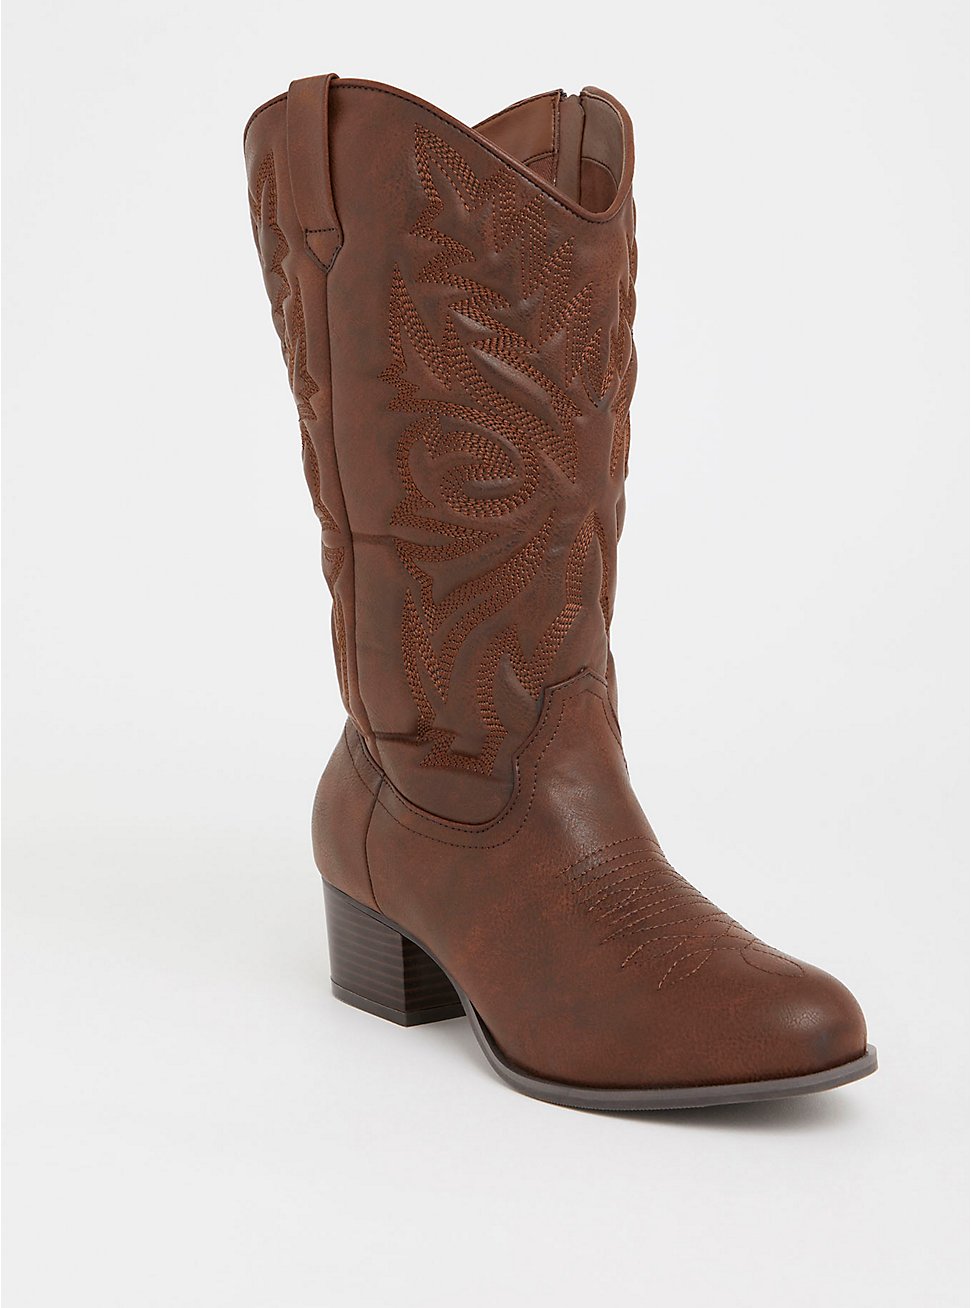 Plus Size - Brown Cowboy Boot (WW & Wide To Extra Wide Calf) - Torrid